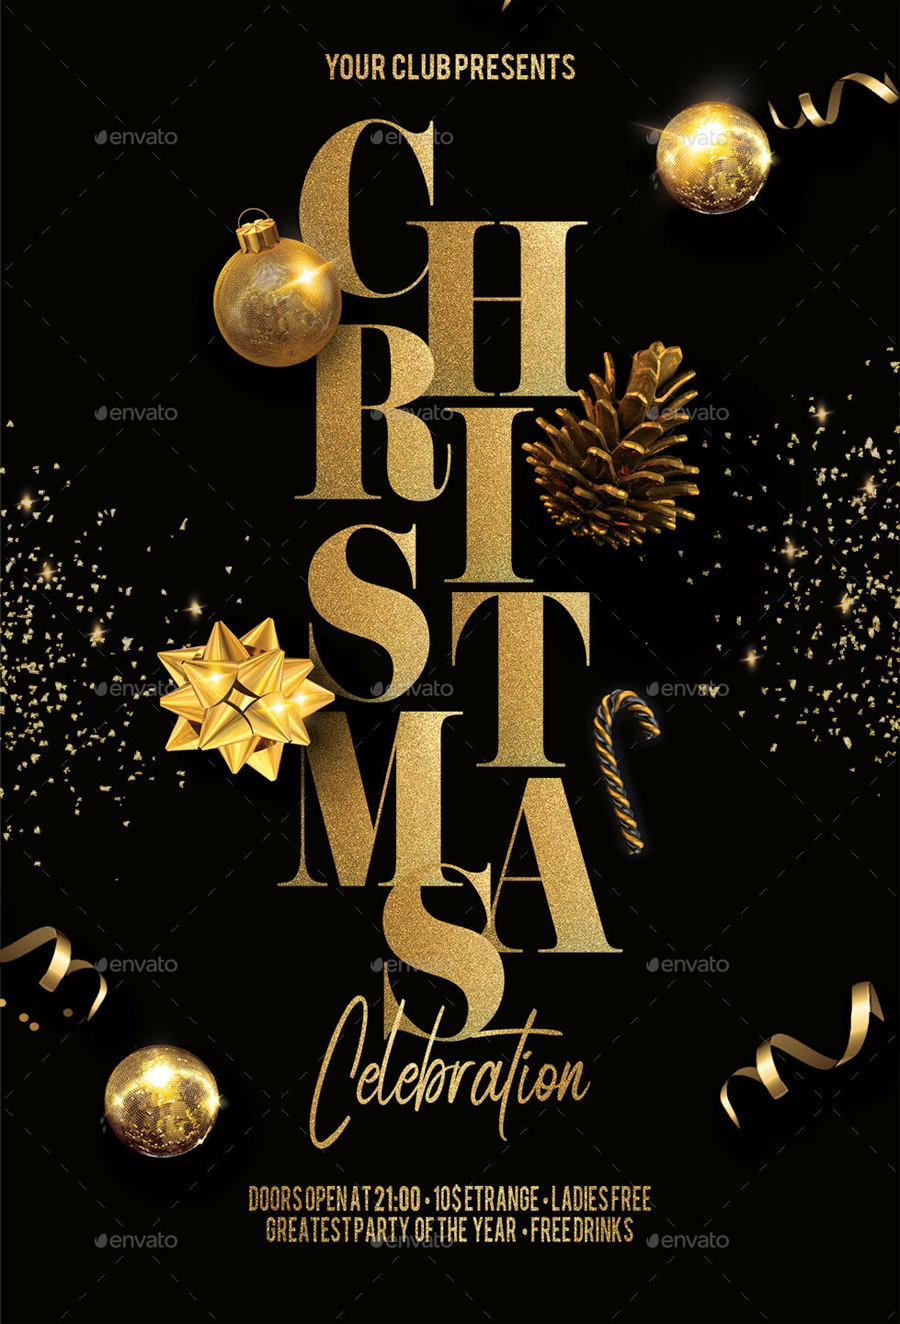 Christmas party flyer template psd